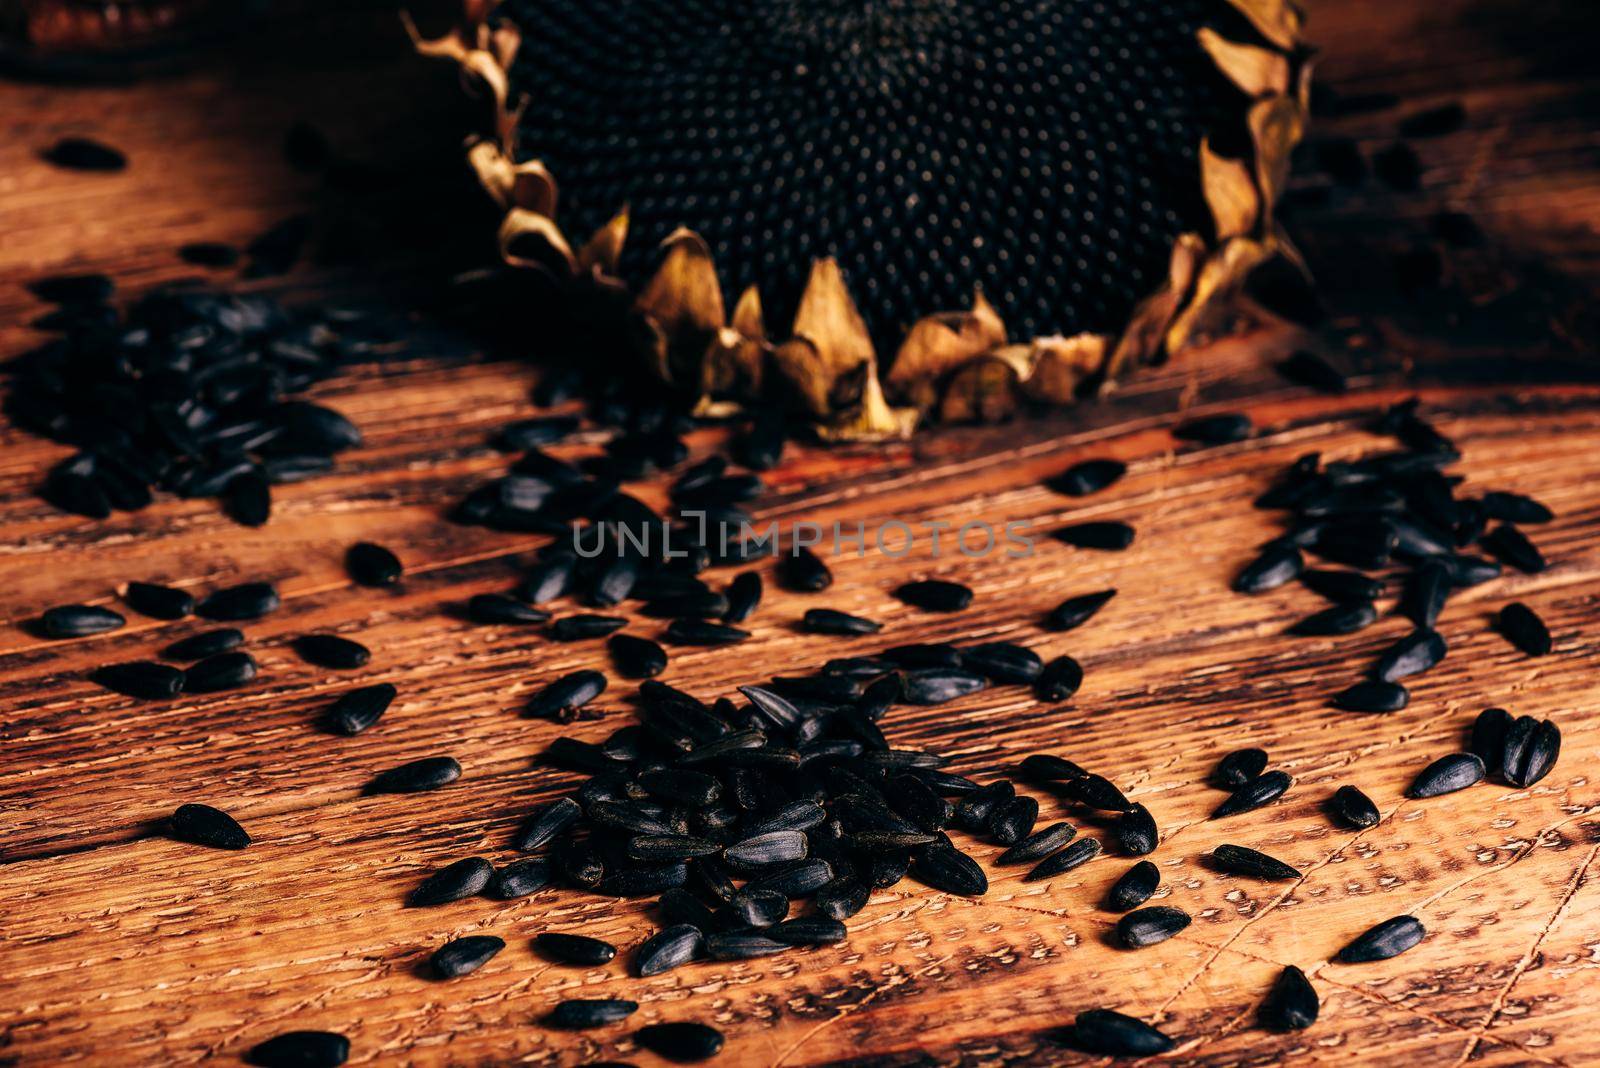 Dried sunflower and roasted seeds on the old wooden table